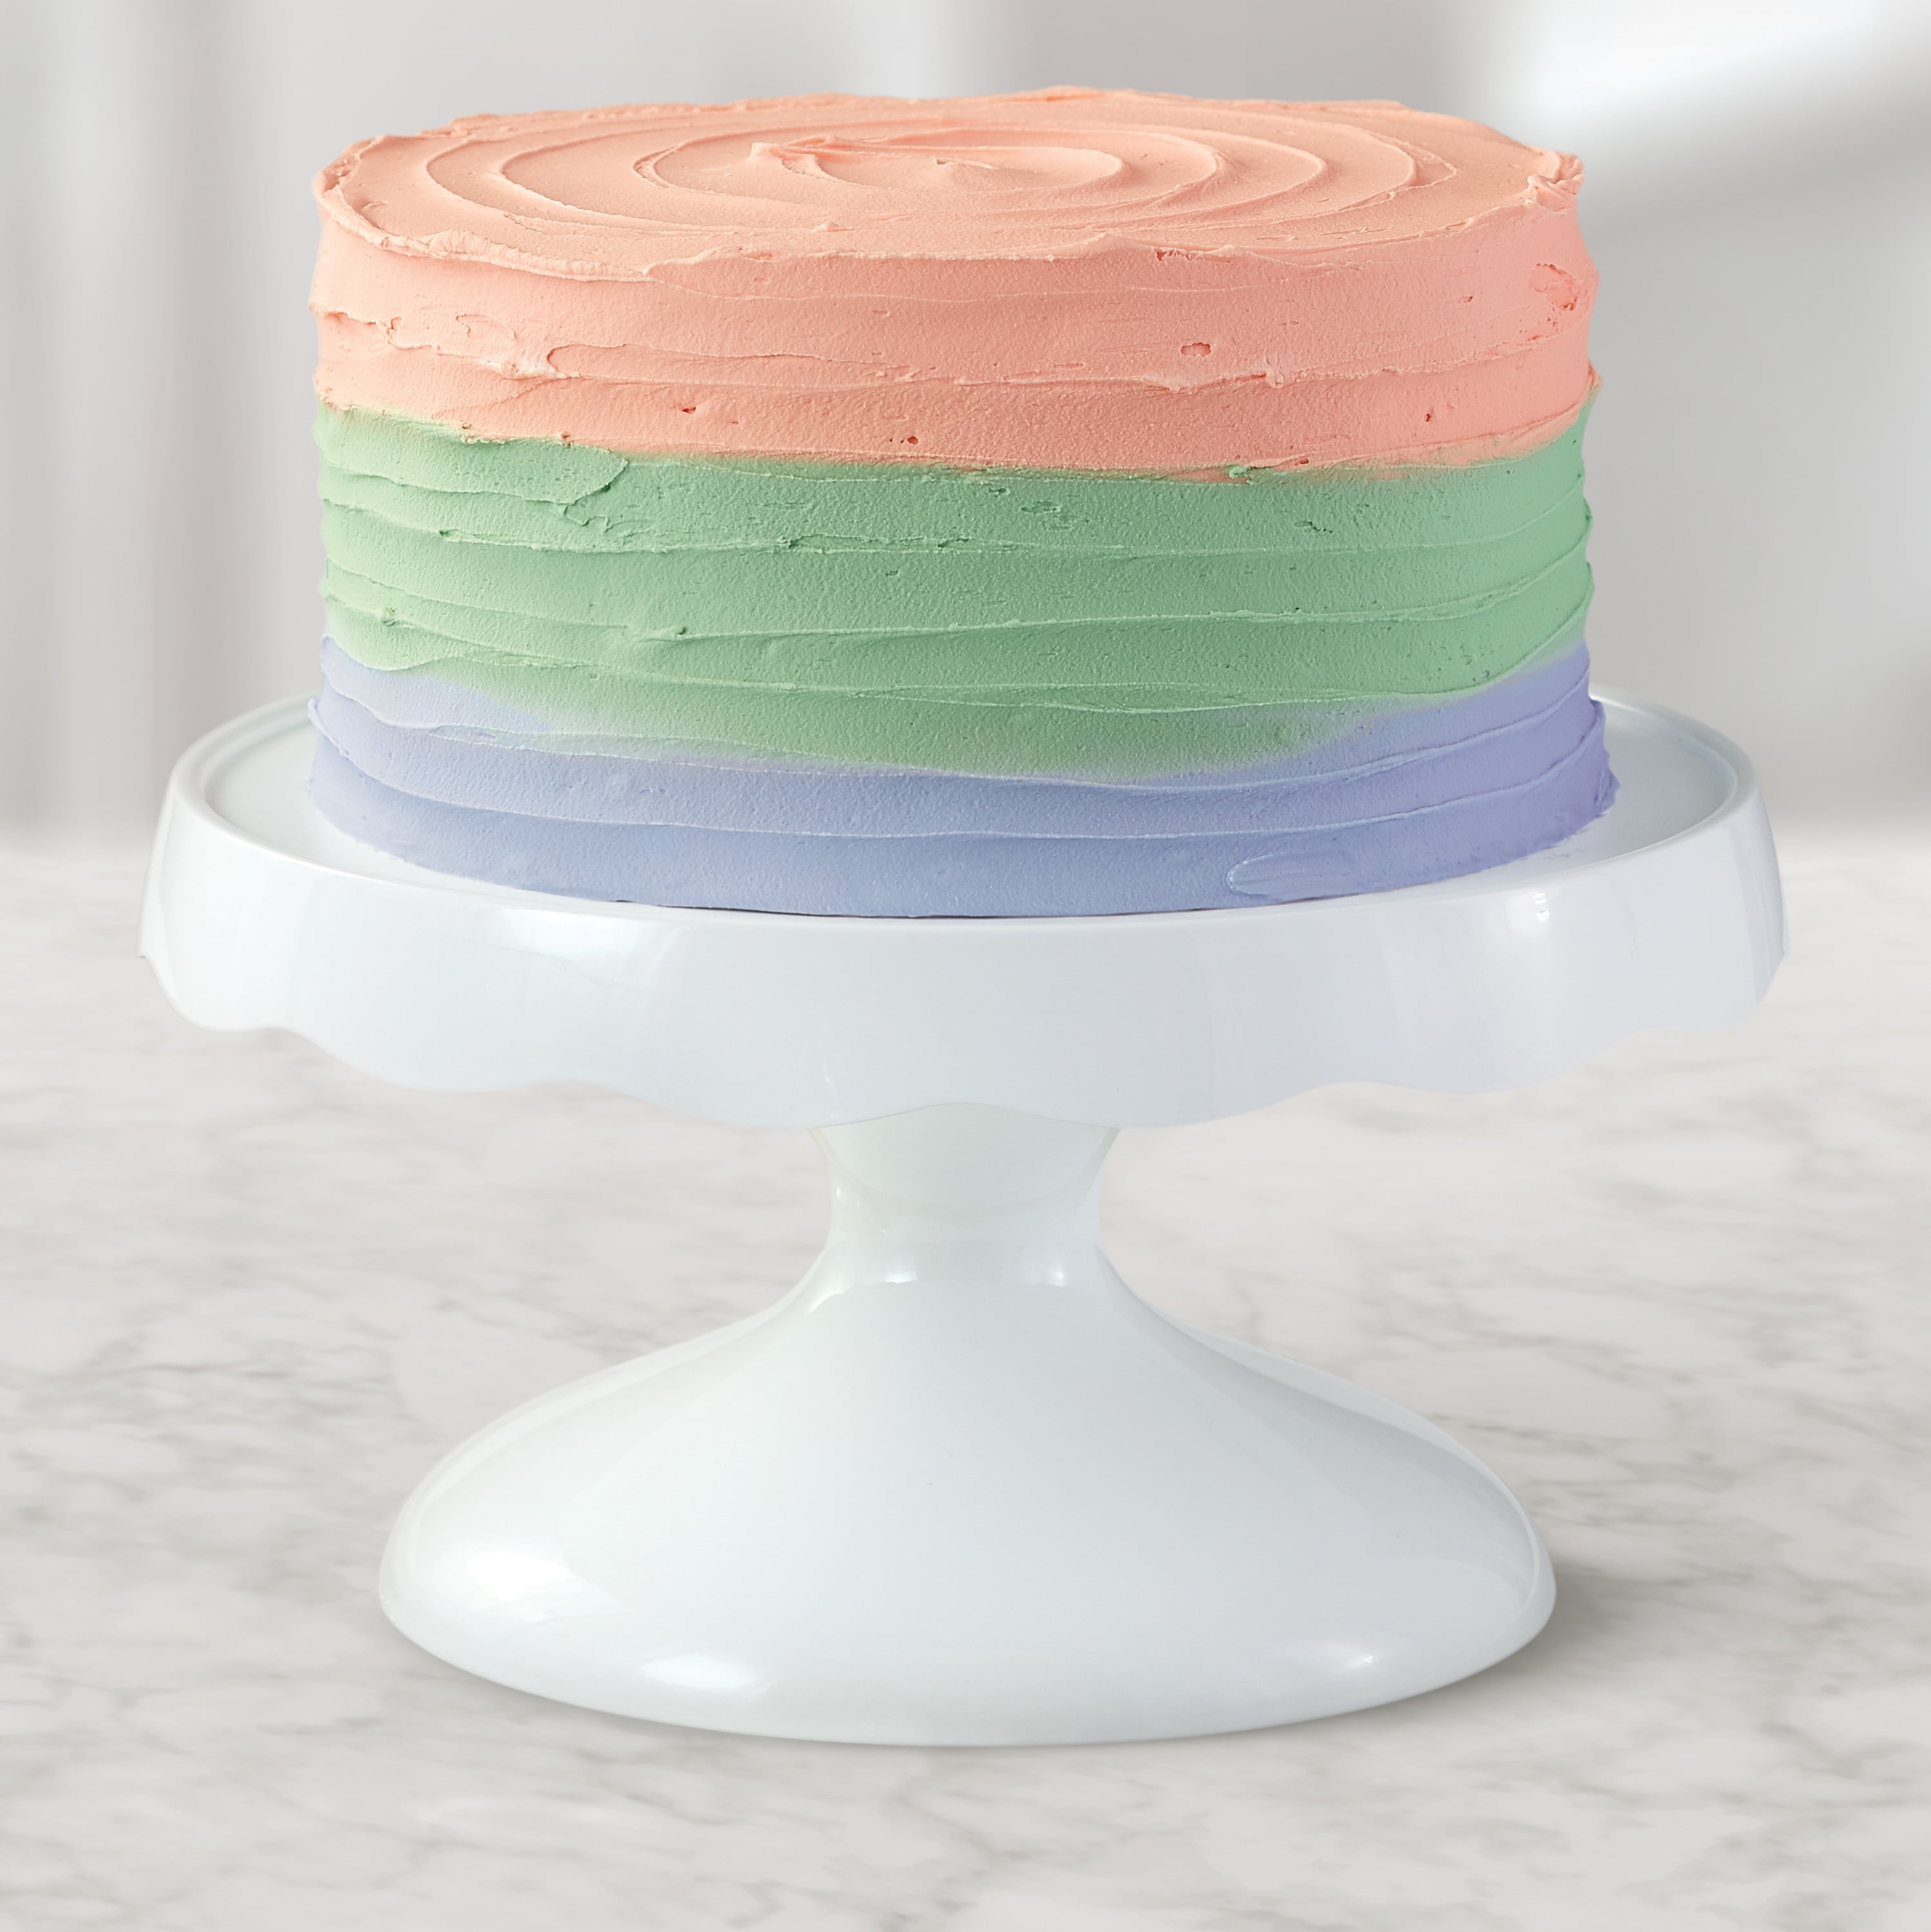 The Pioneer Woman Timeless Beauty 10-Inch Cake Stand with Glass Cover, Mint  Green - Walmart.com